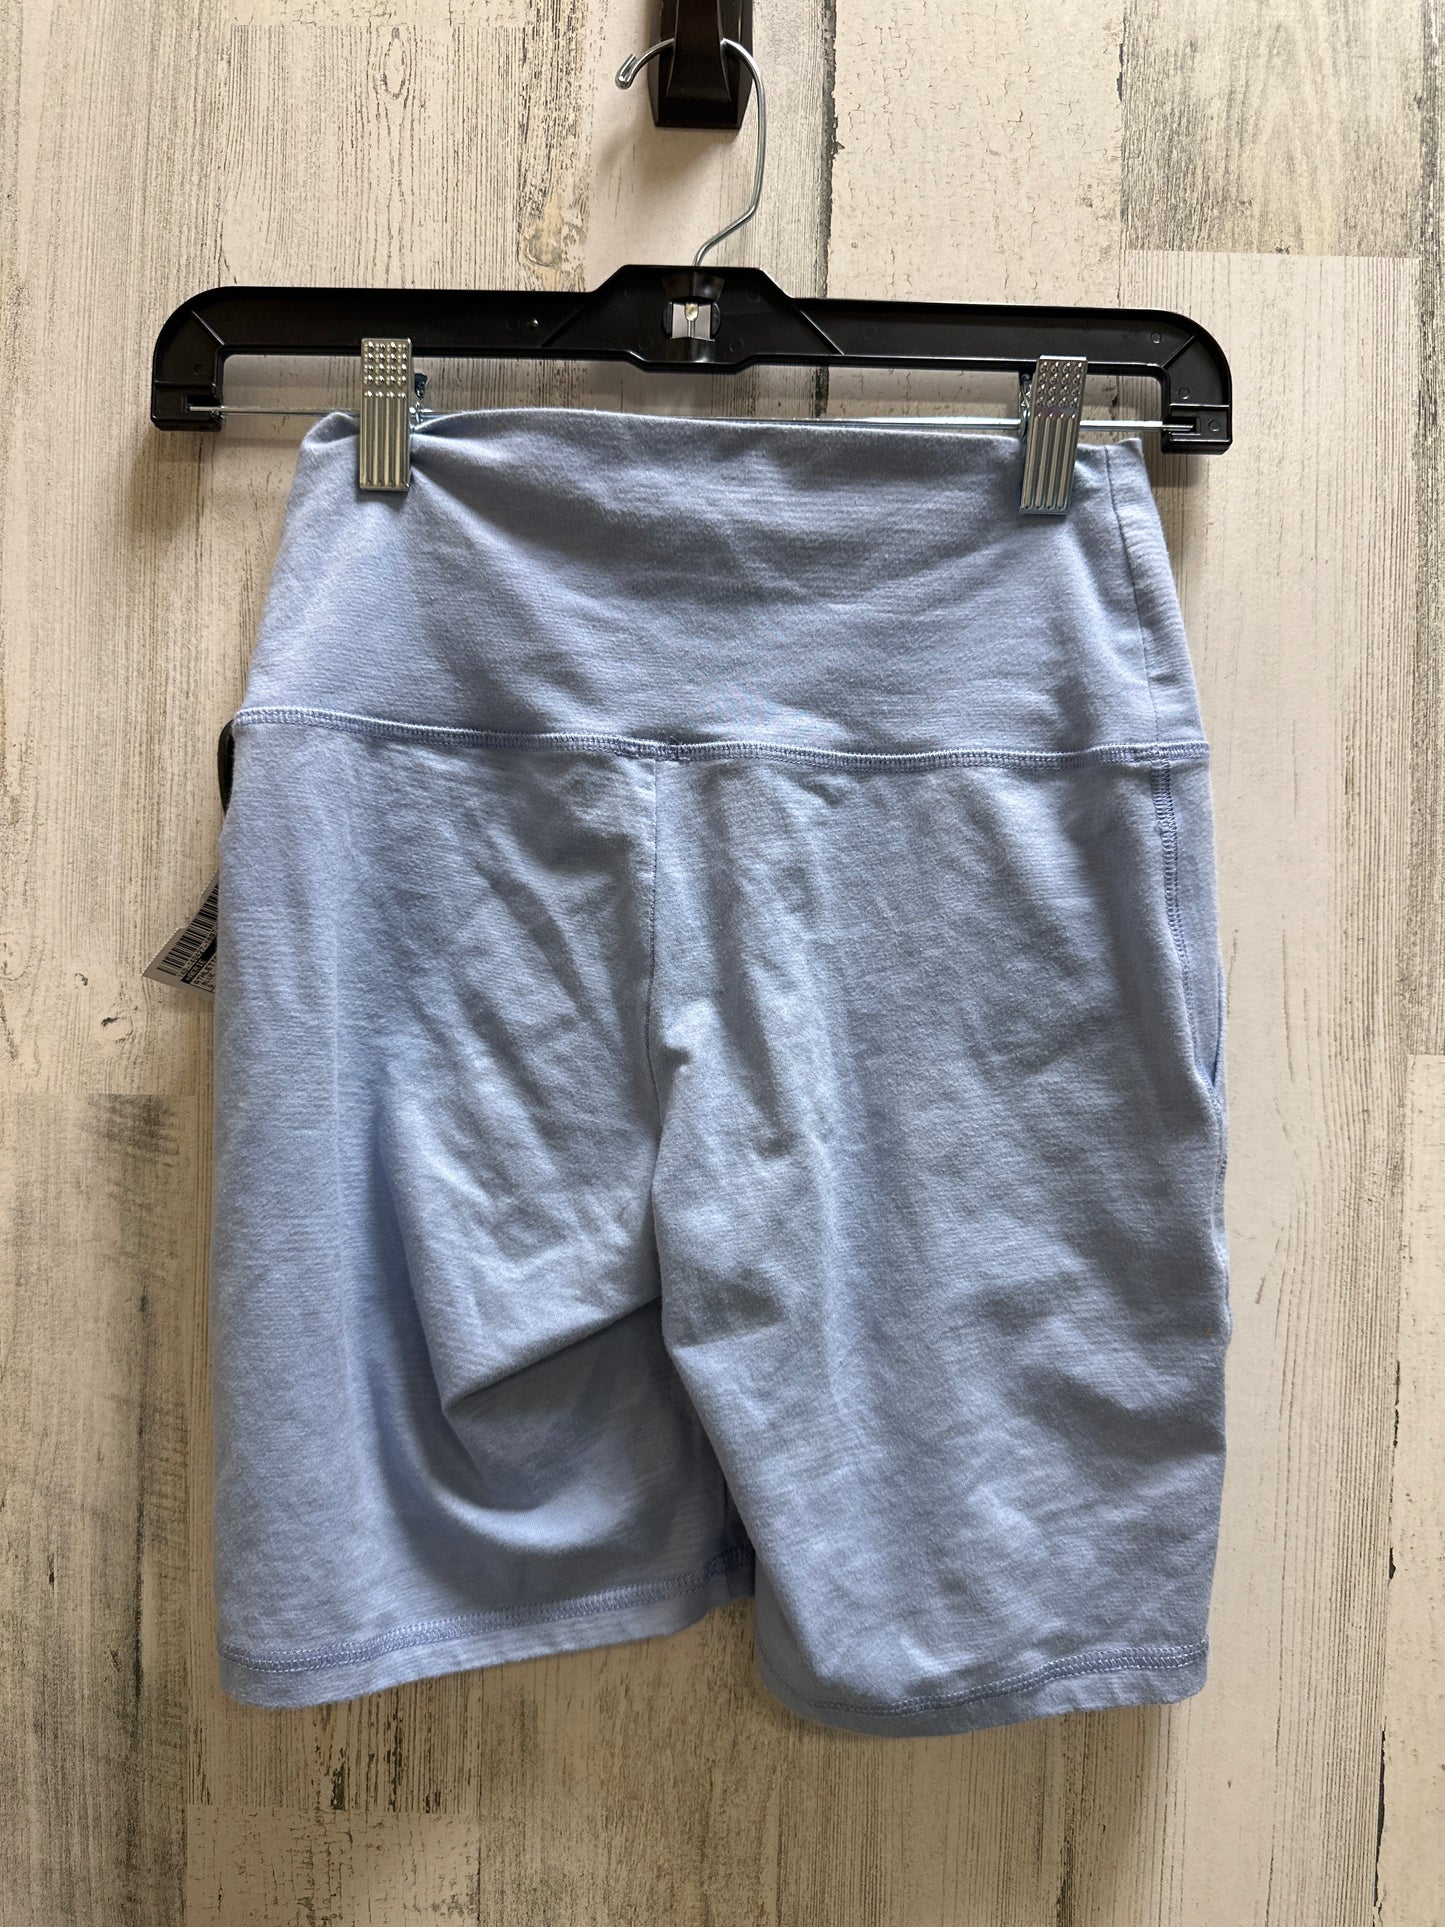 Blue Athletic Shorts Aerie, Size S